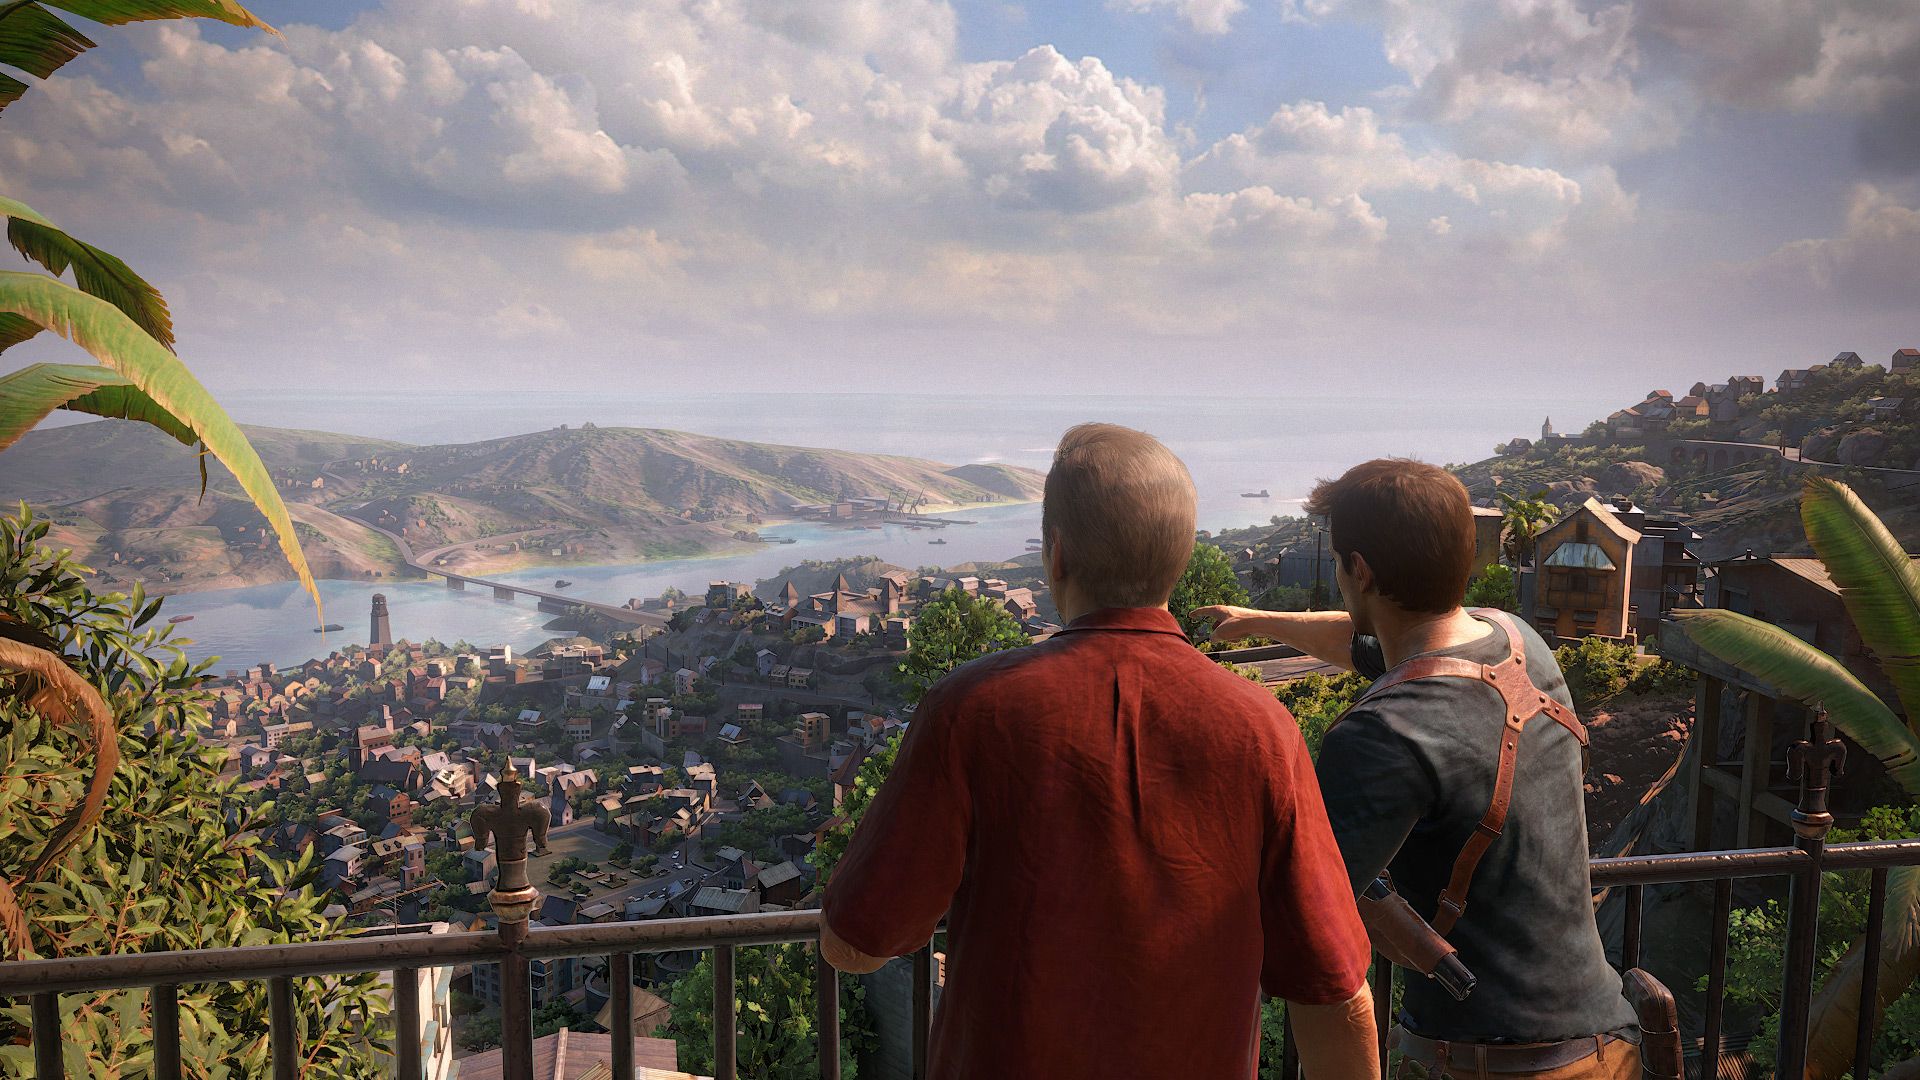 Uncharted 4 PC Port Confirmed in Official Sony Documents